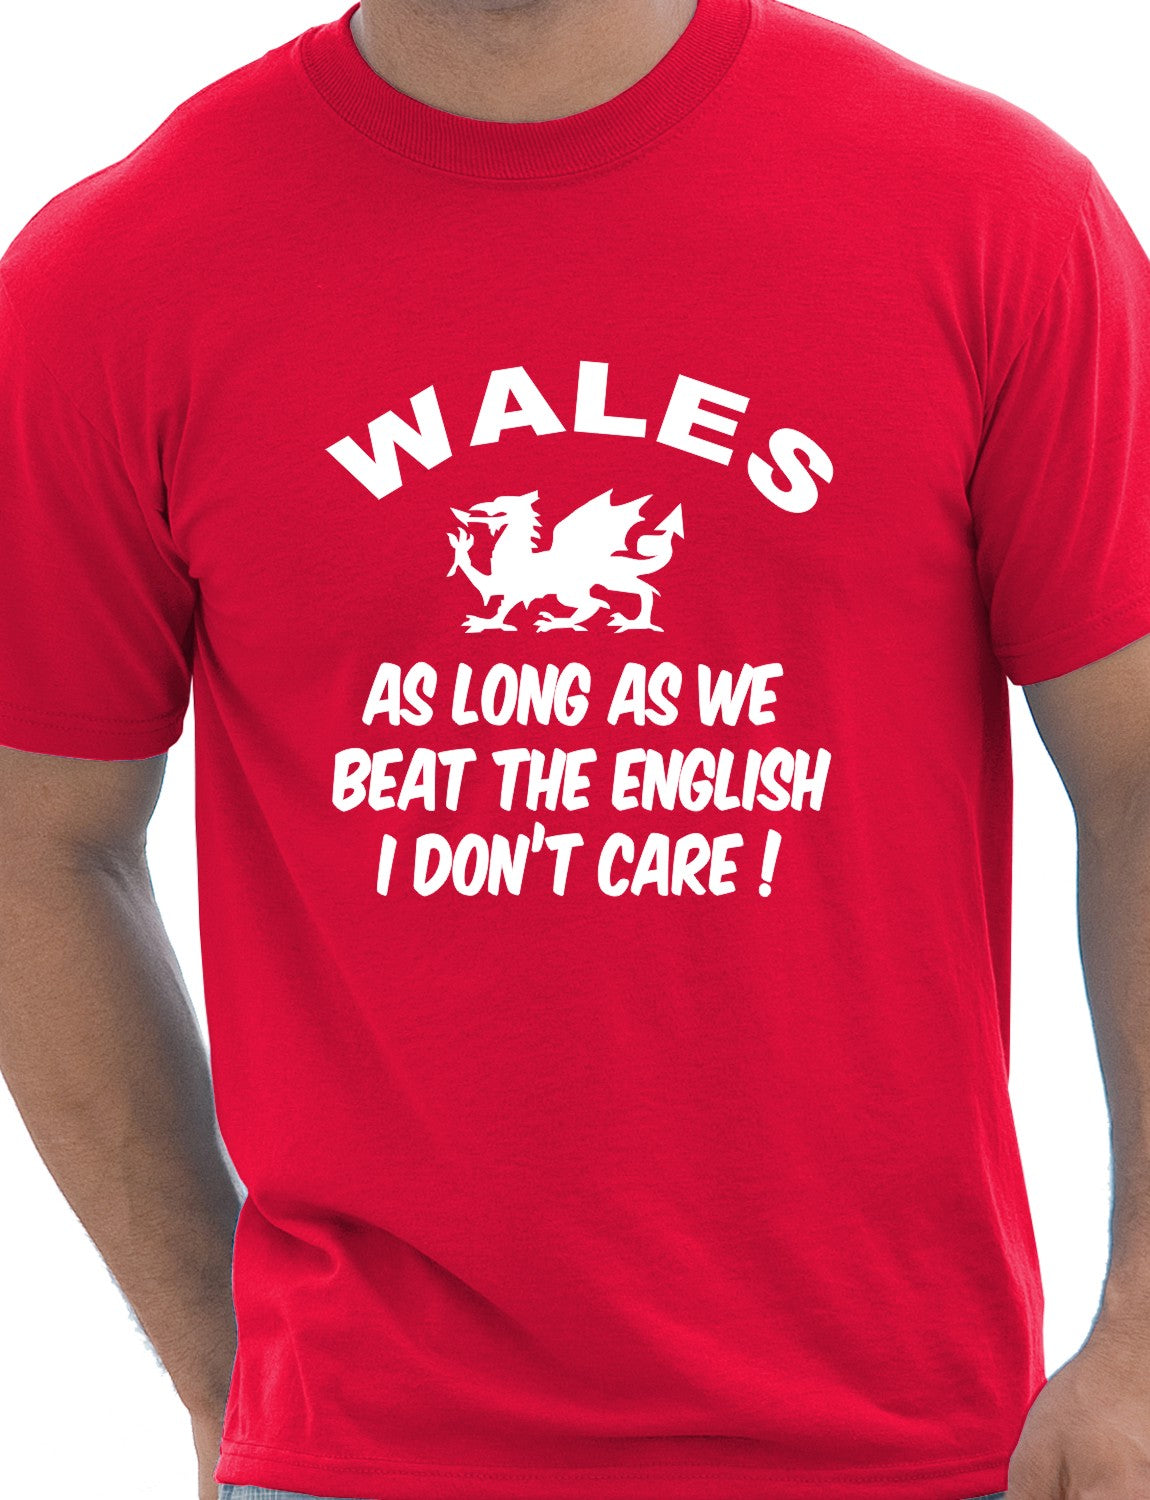 Wales As Long As We Beat The English Rugby Mens T-Shirt Size S-XXL